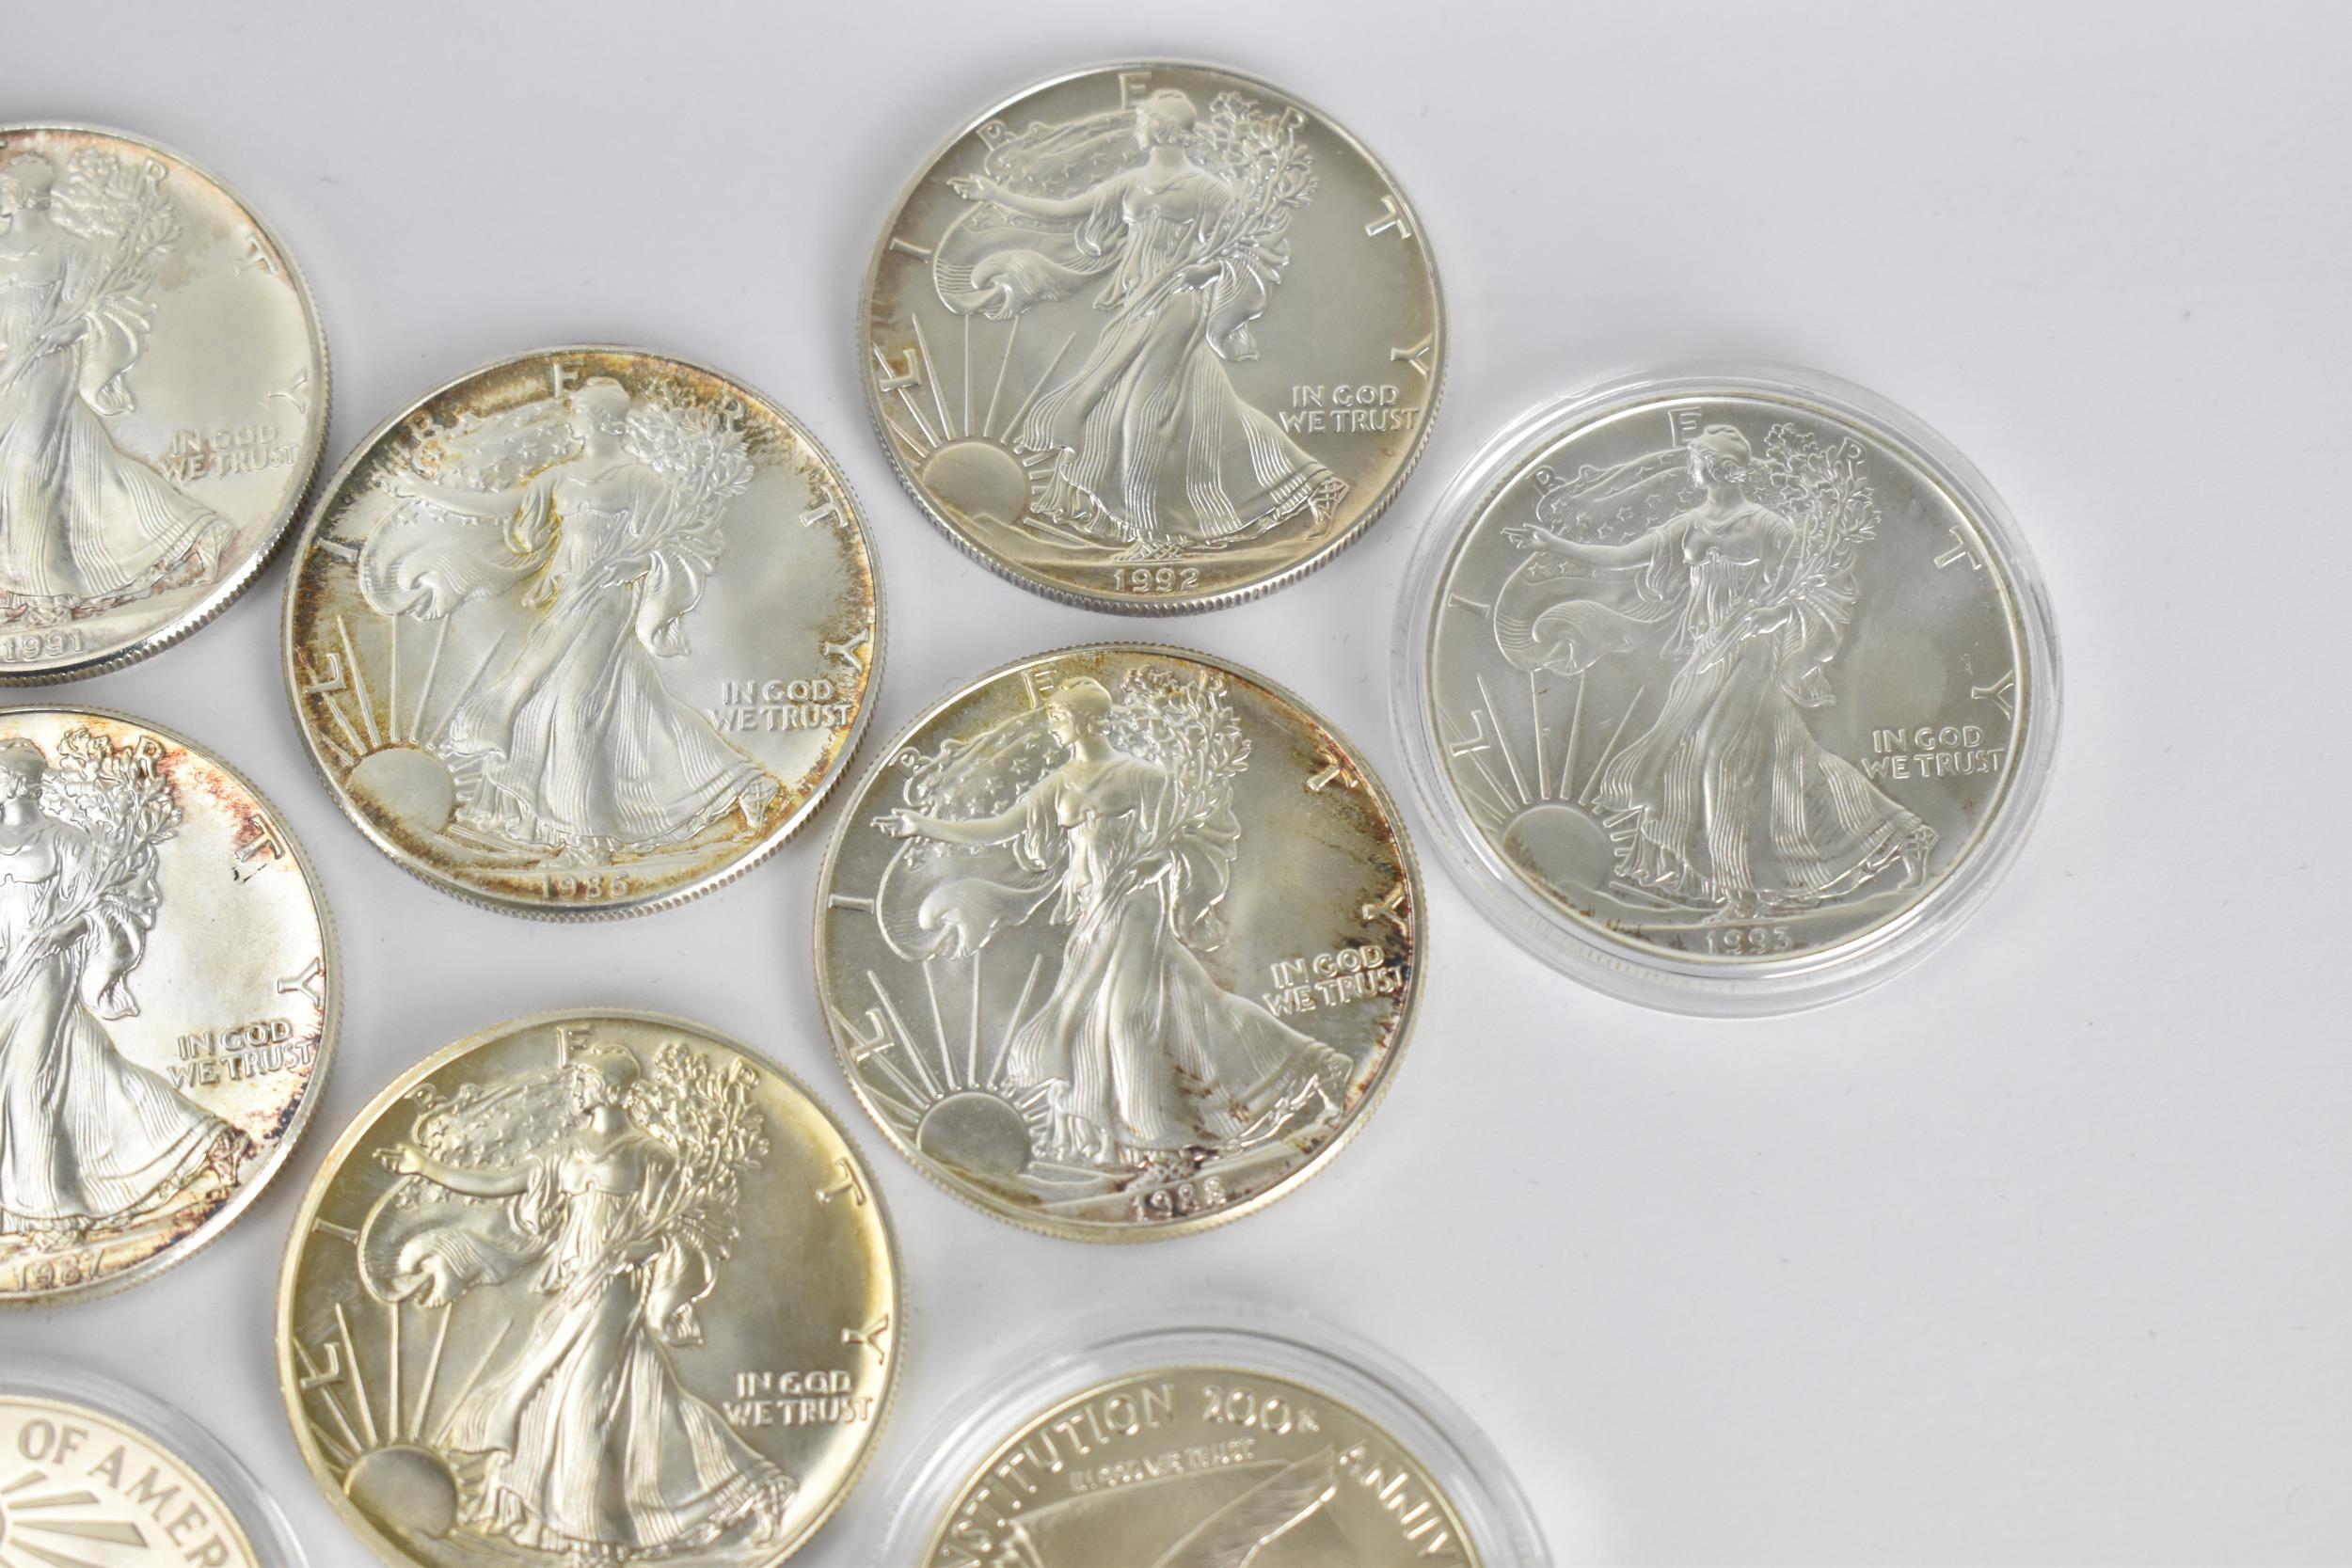 Official Silver Coins of The United States of America' part of the Royal Mint collection, eight ' - Image 9 of 10